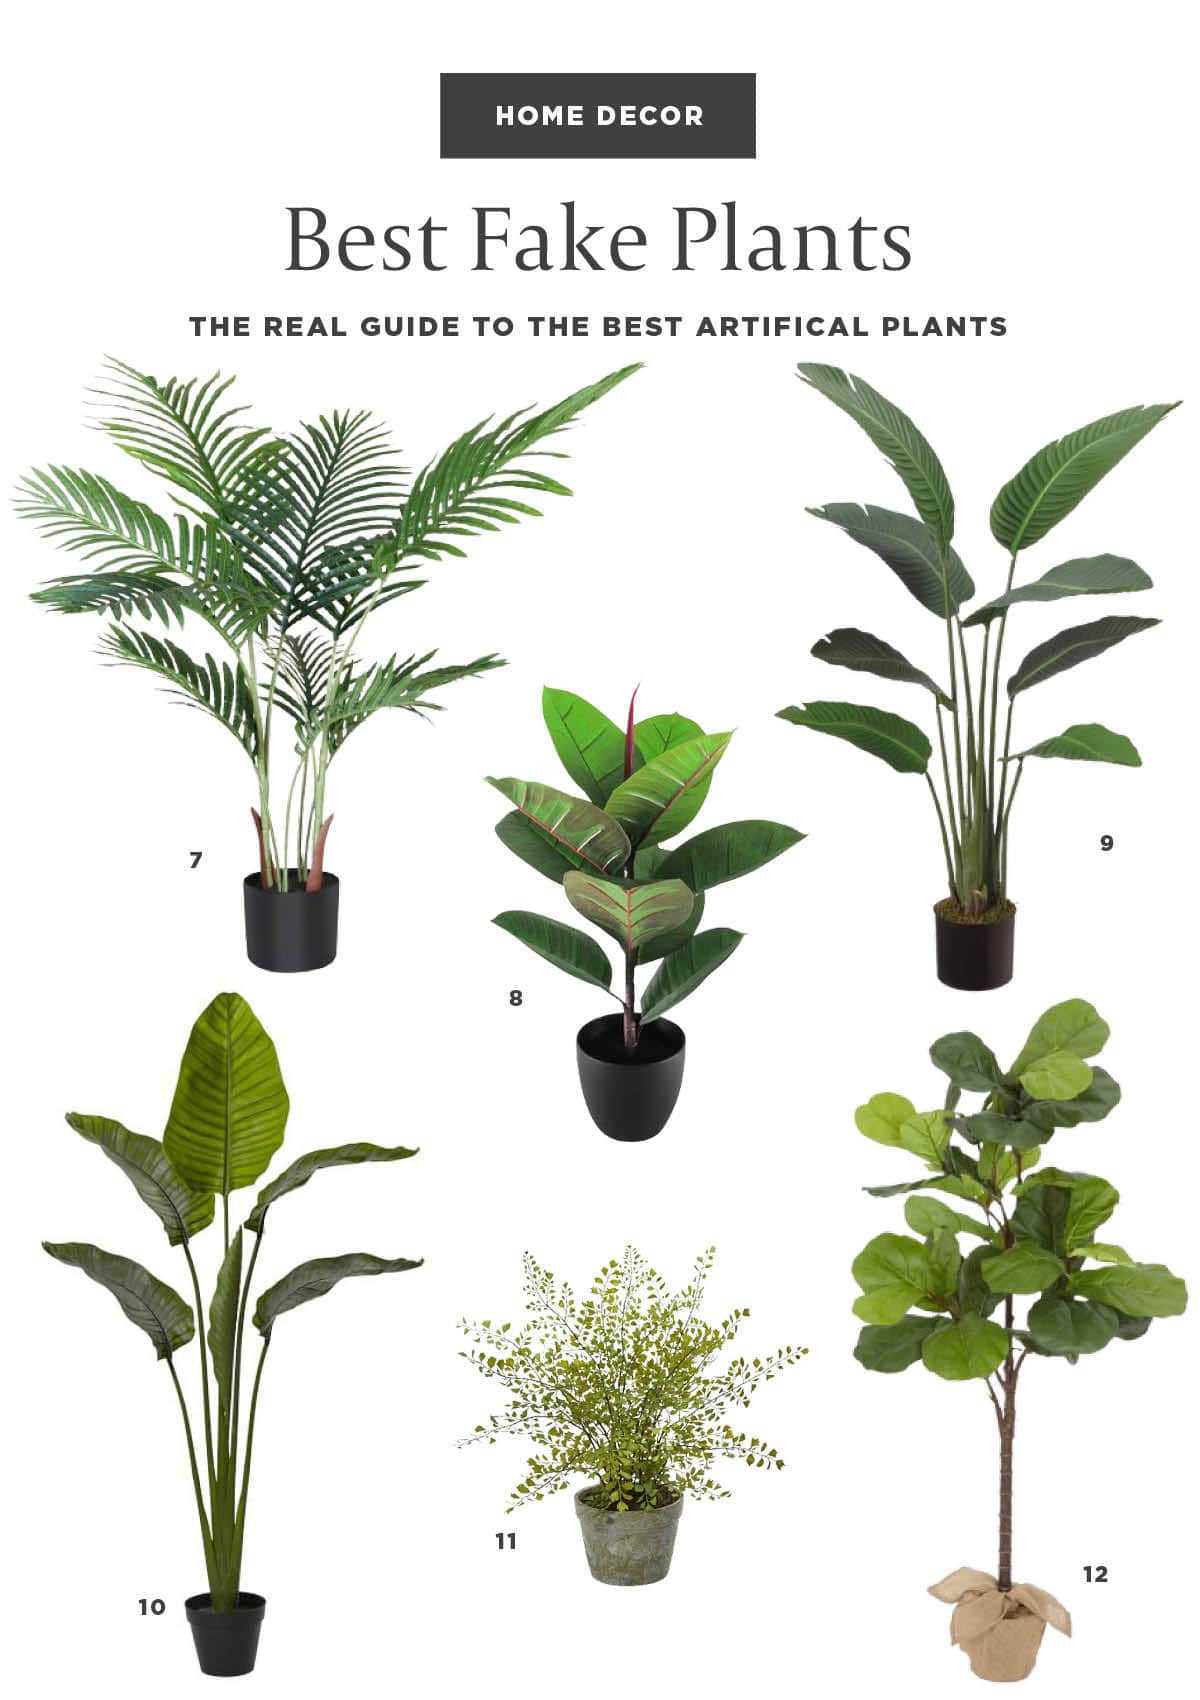 Guide to the best fake plants that look real